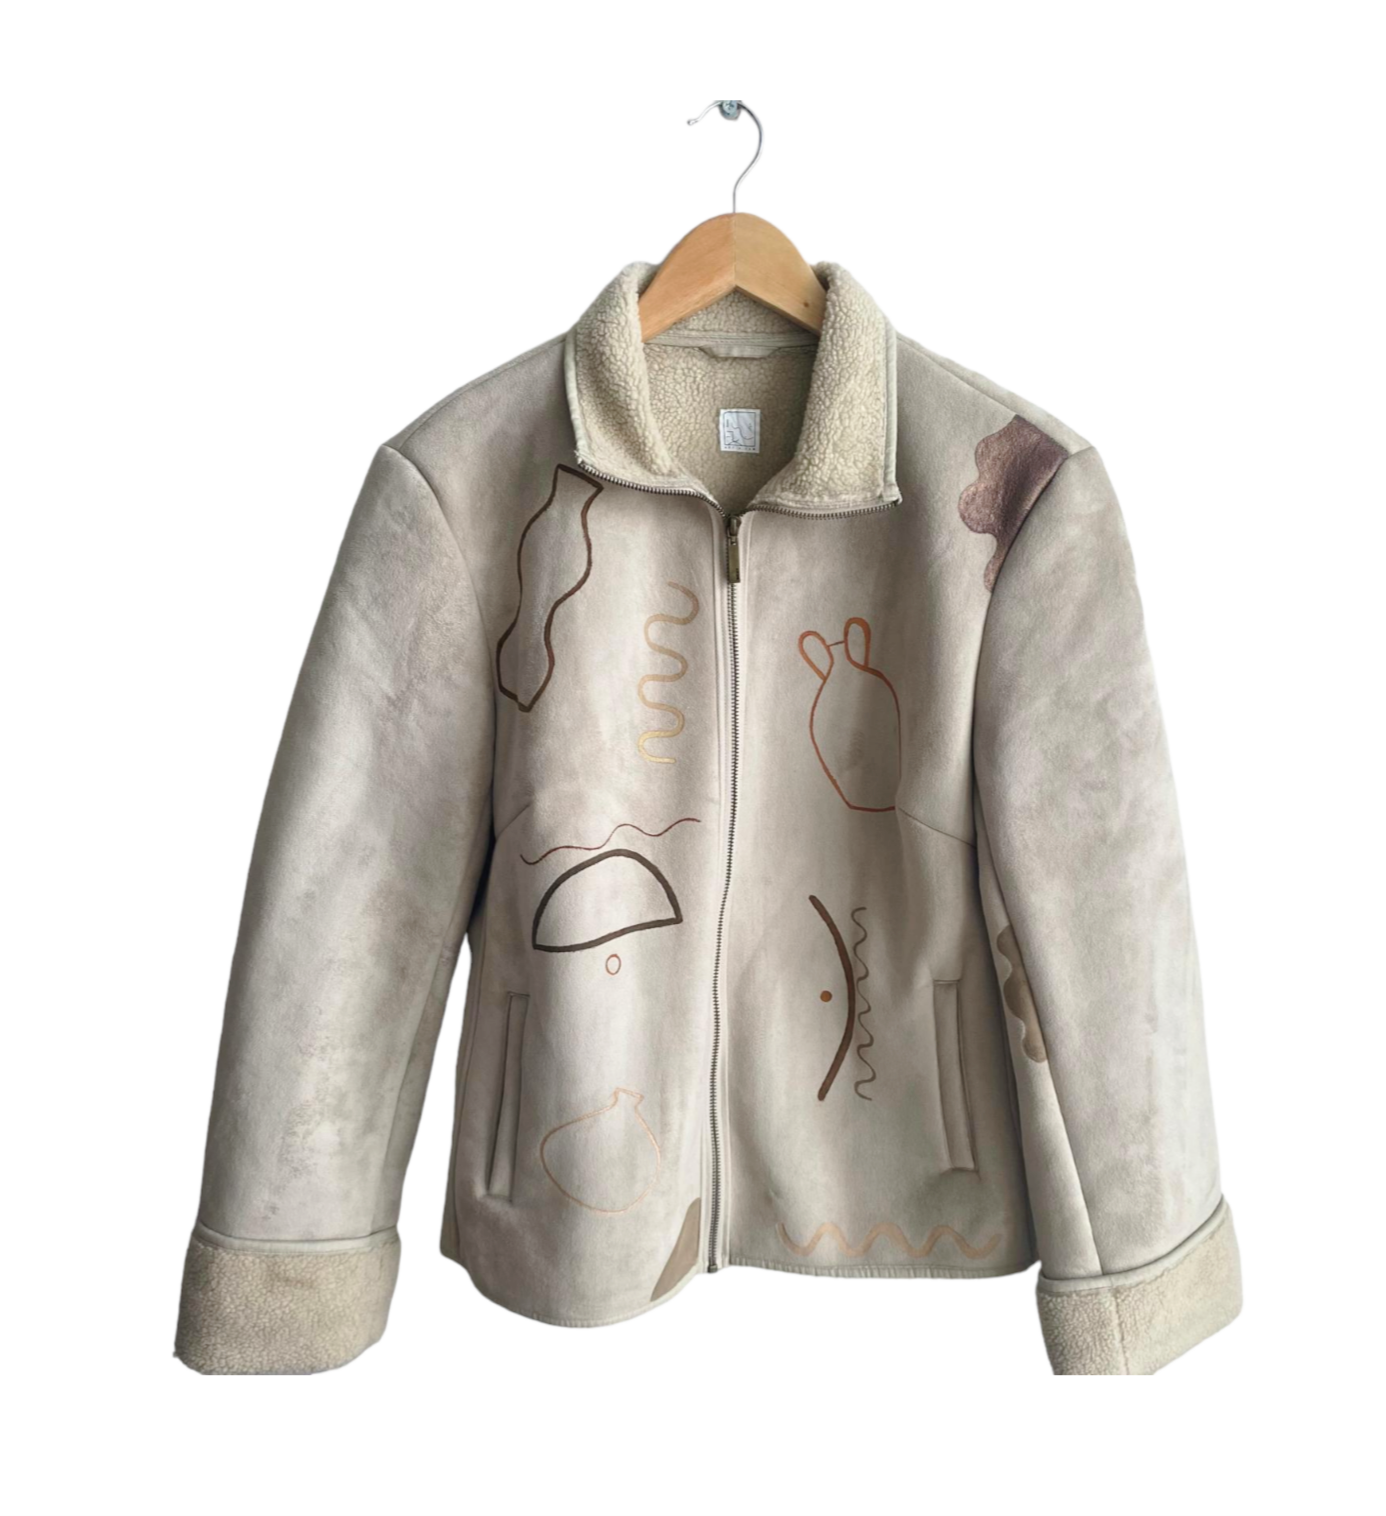 Aff & Jam Hand painted Abstract Fleece - Radical Giving